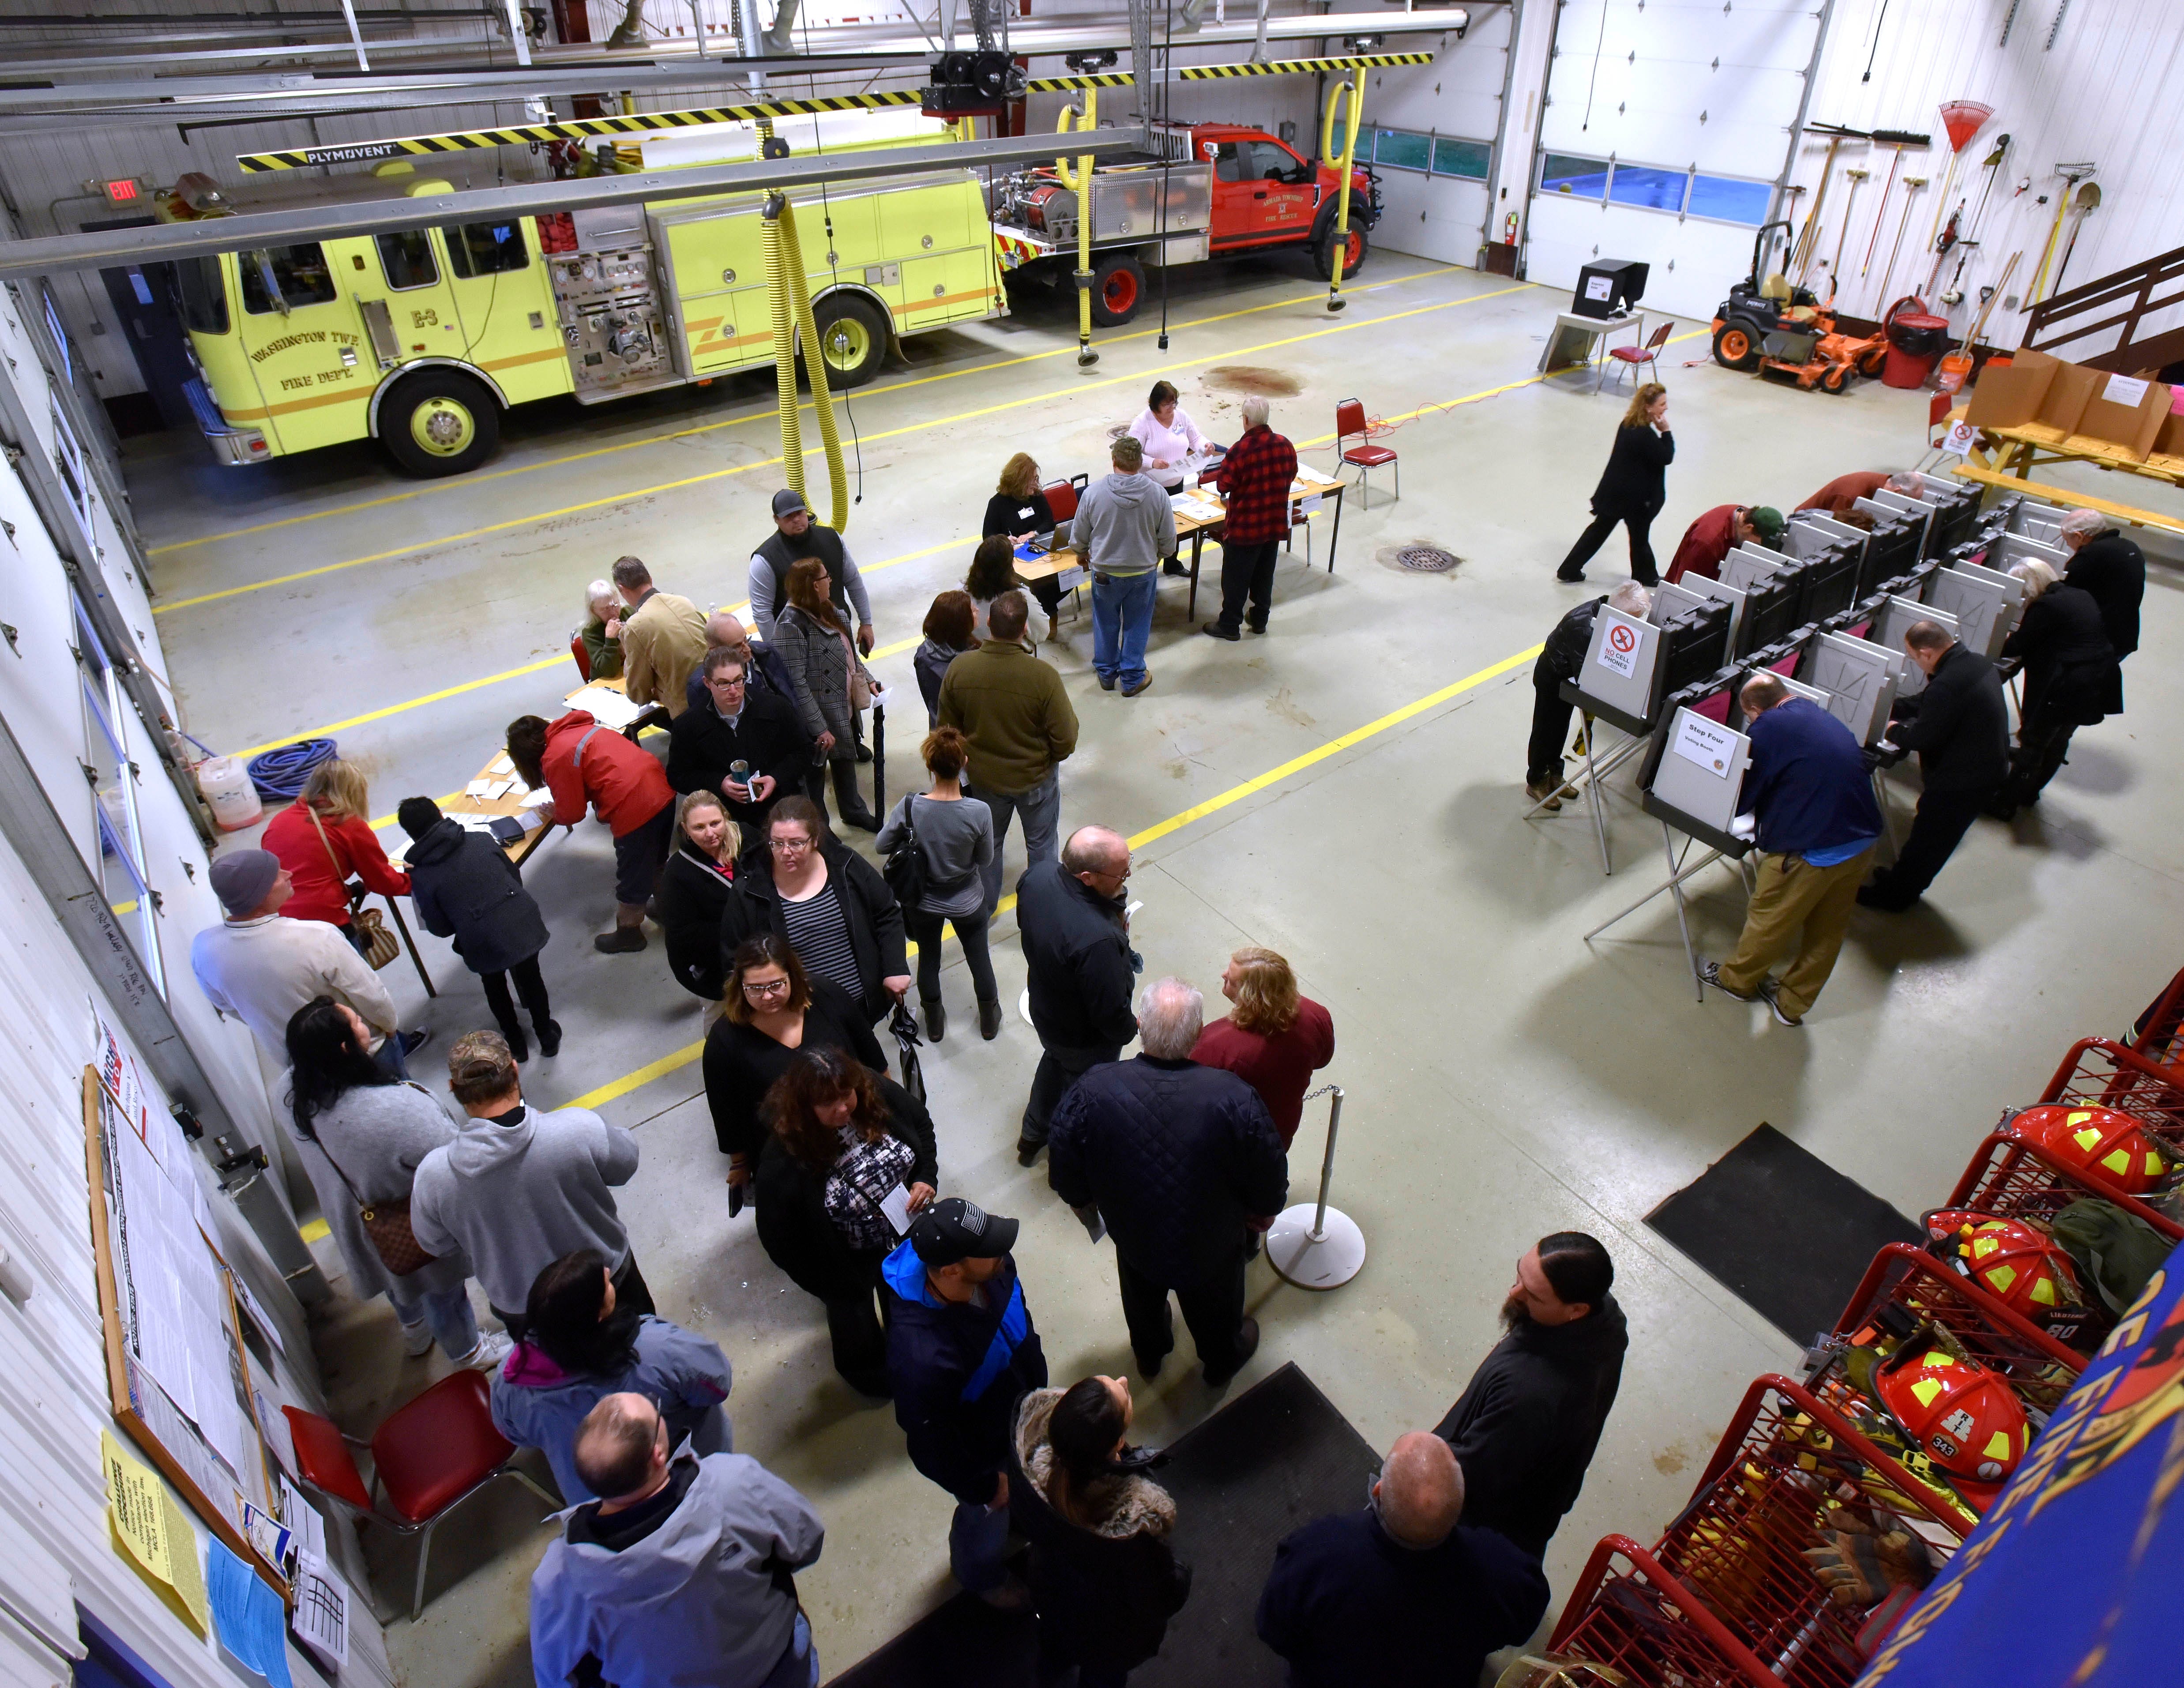 Voter lines serpentine at Precinct 1 inside the Armada Twp. Fire Station Tuesday morning. Among other ballot issues in Armada Twp. is a fire protection millage increase, which would provide additional funding for new fire trucks and fire fighting equipment replacement.